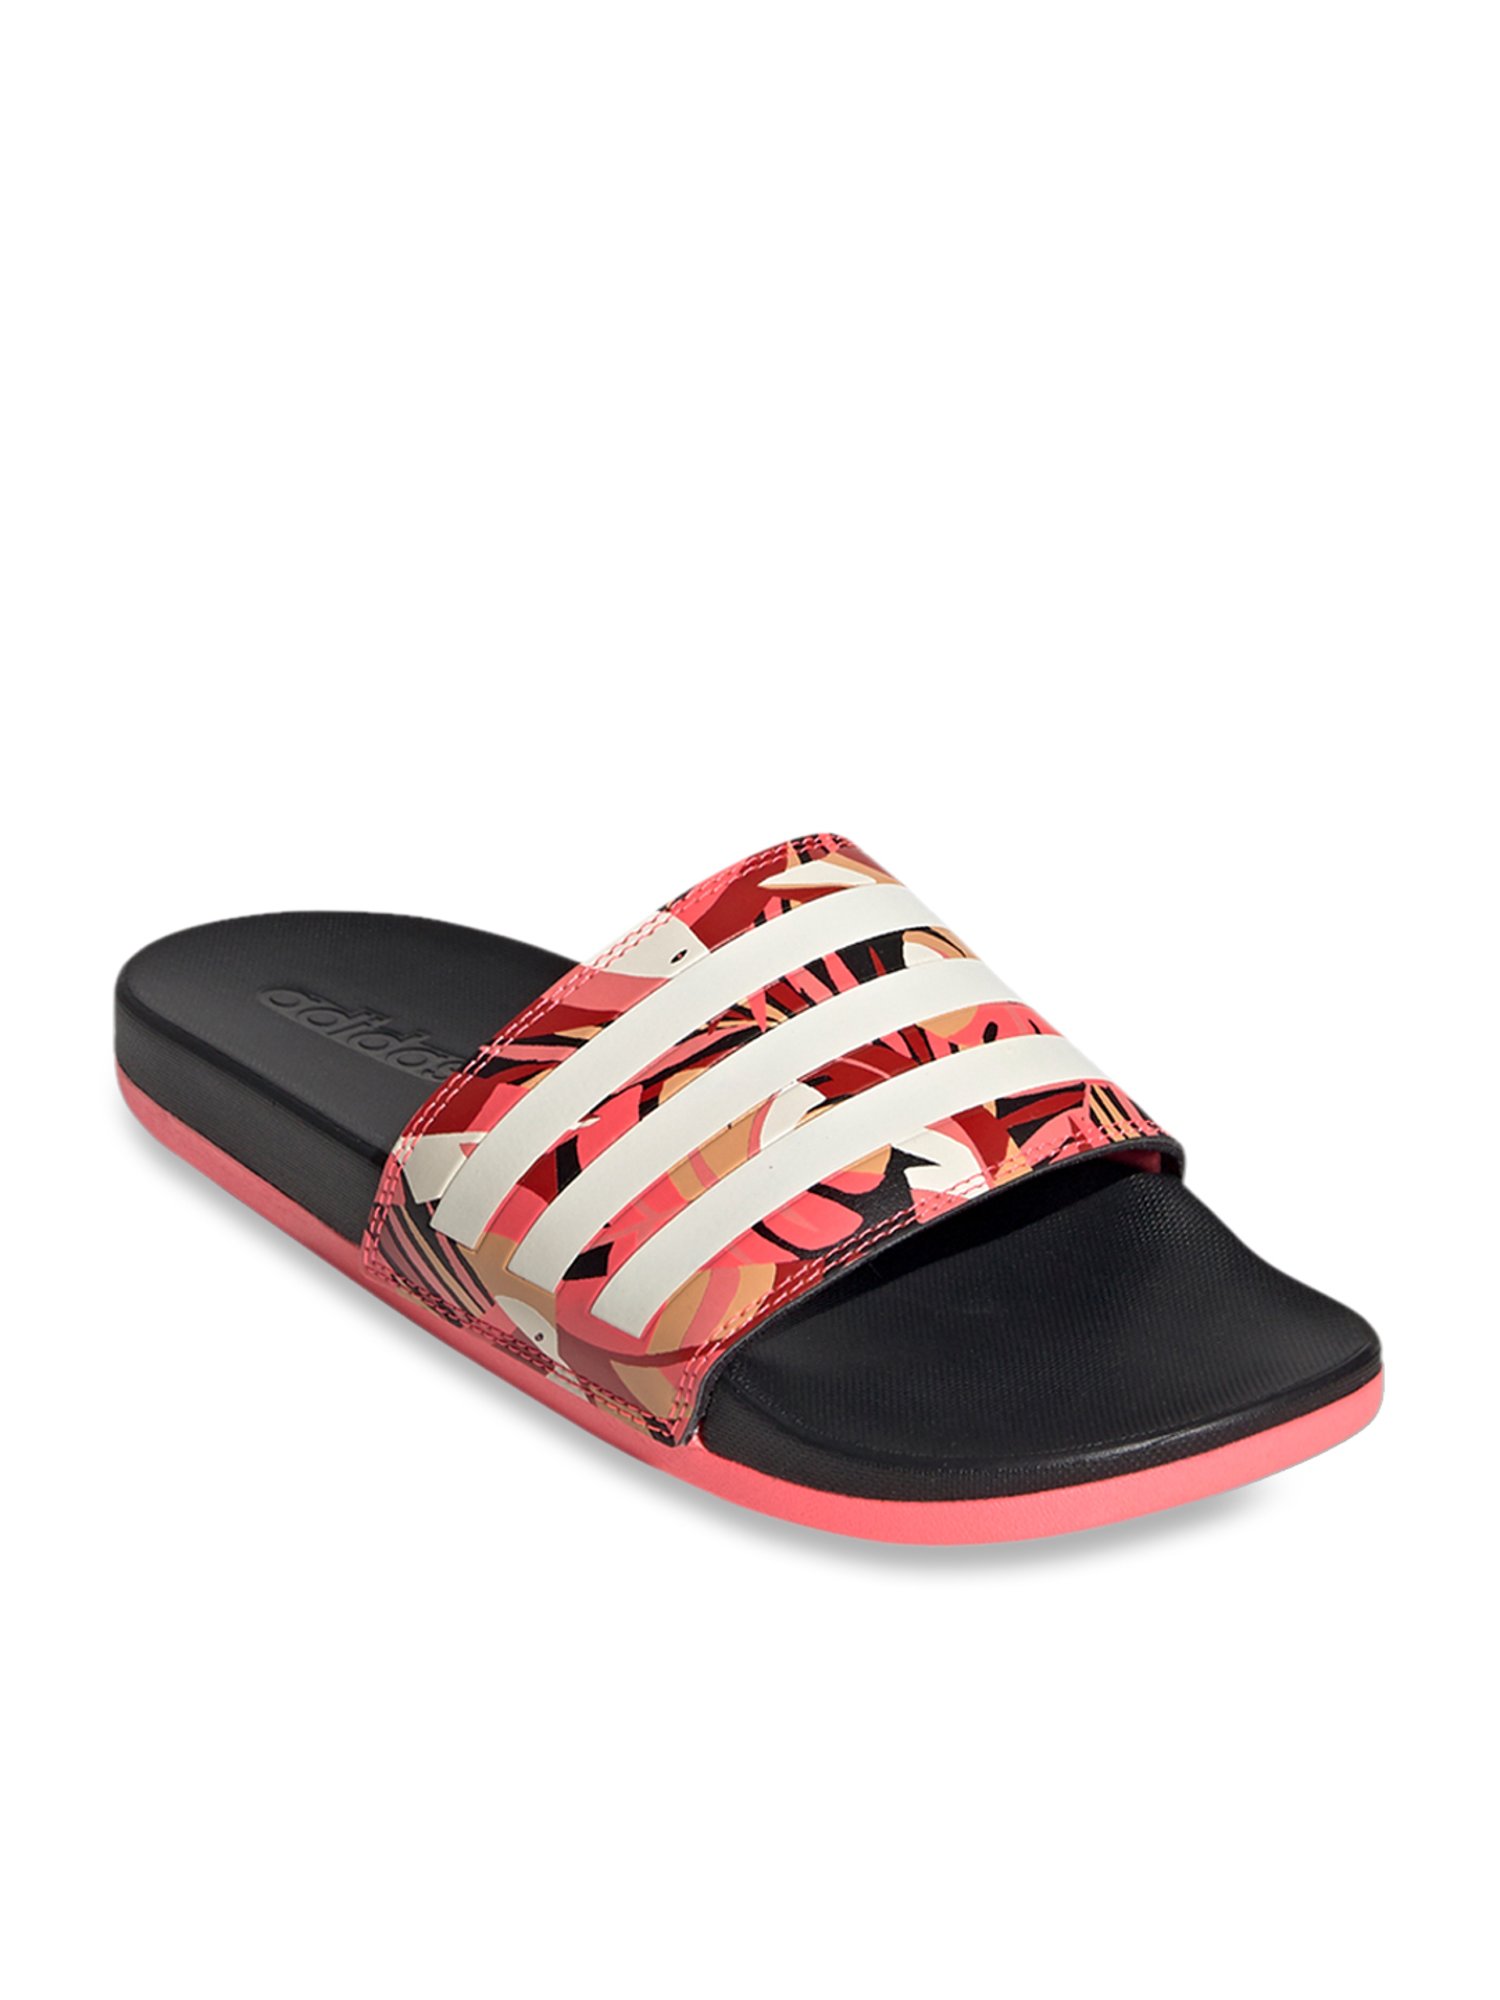 Adidas Women S Adilette Comfort Pink Casual Sandals From Adidas At Best Prices On Tata Cliq